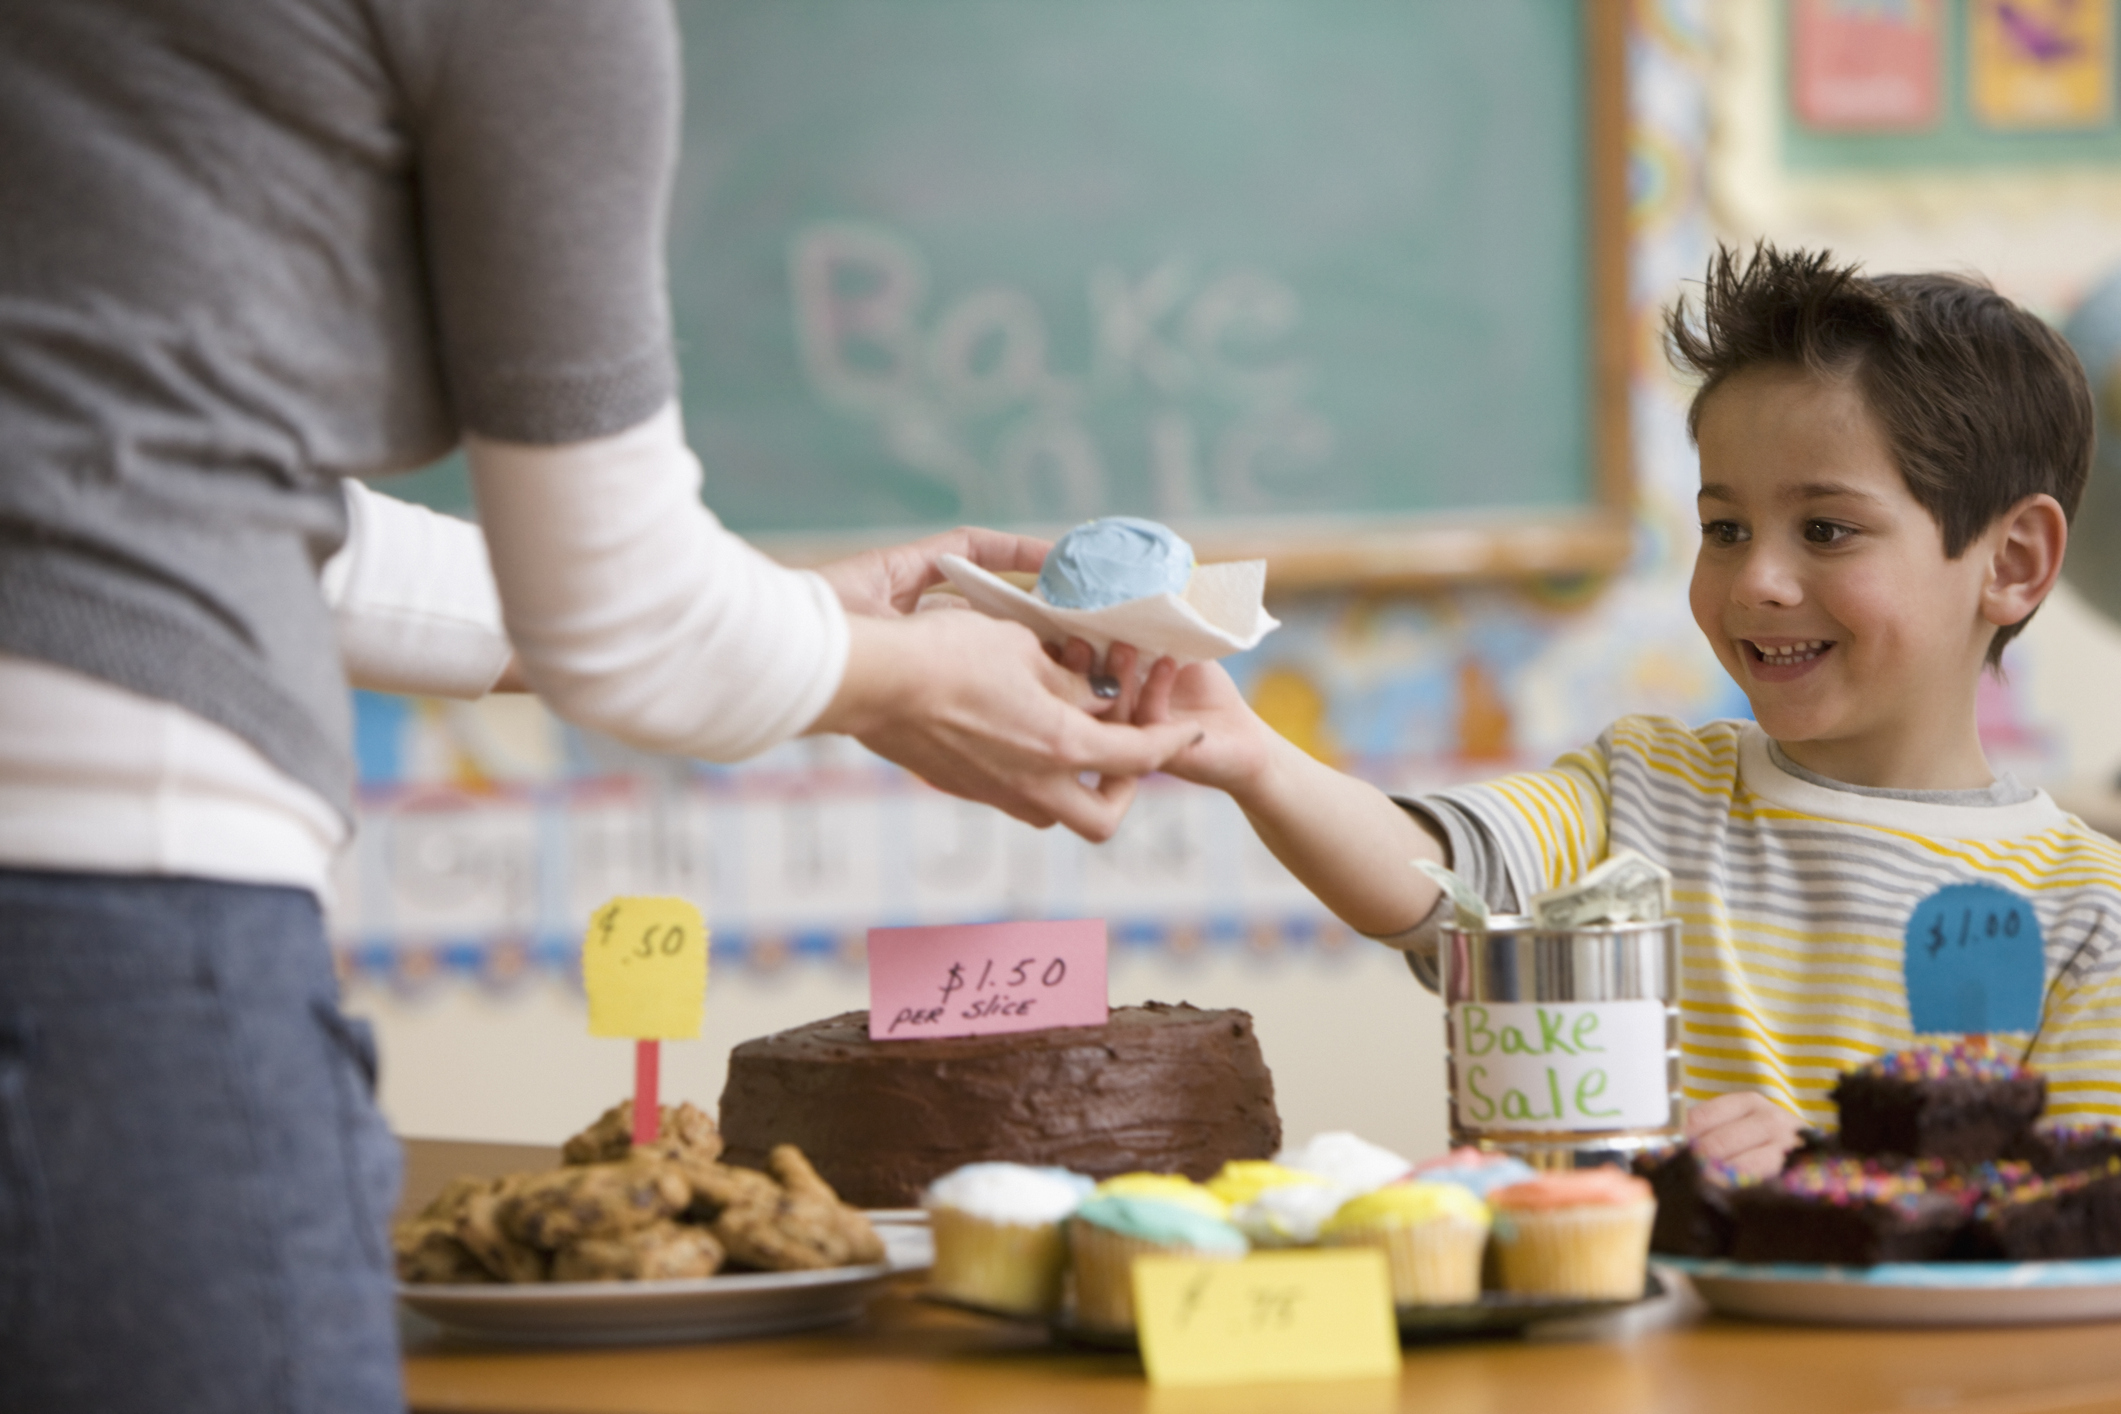 A little boy pictured handing over a cupcake during a school bake sale | Source: Getty Images